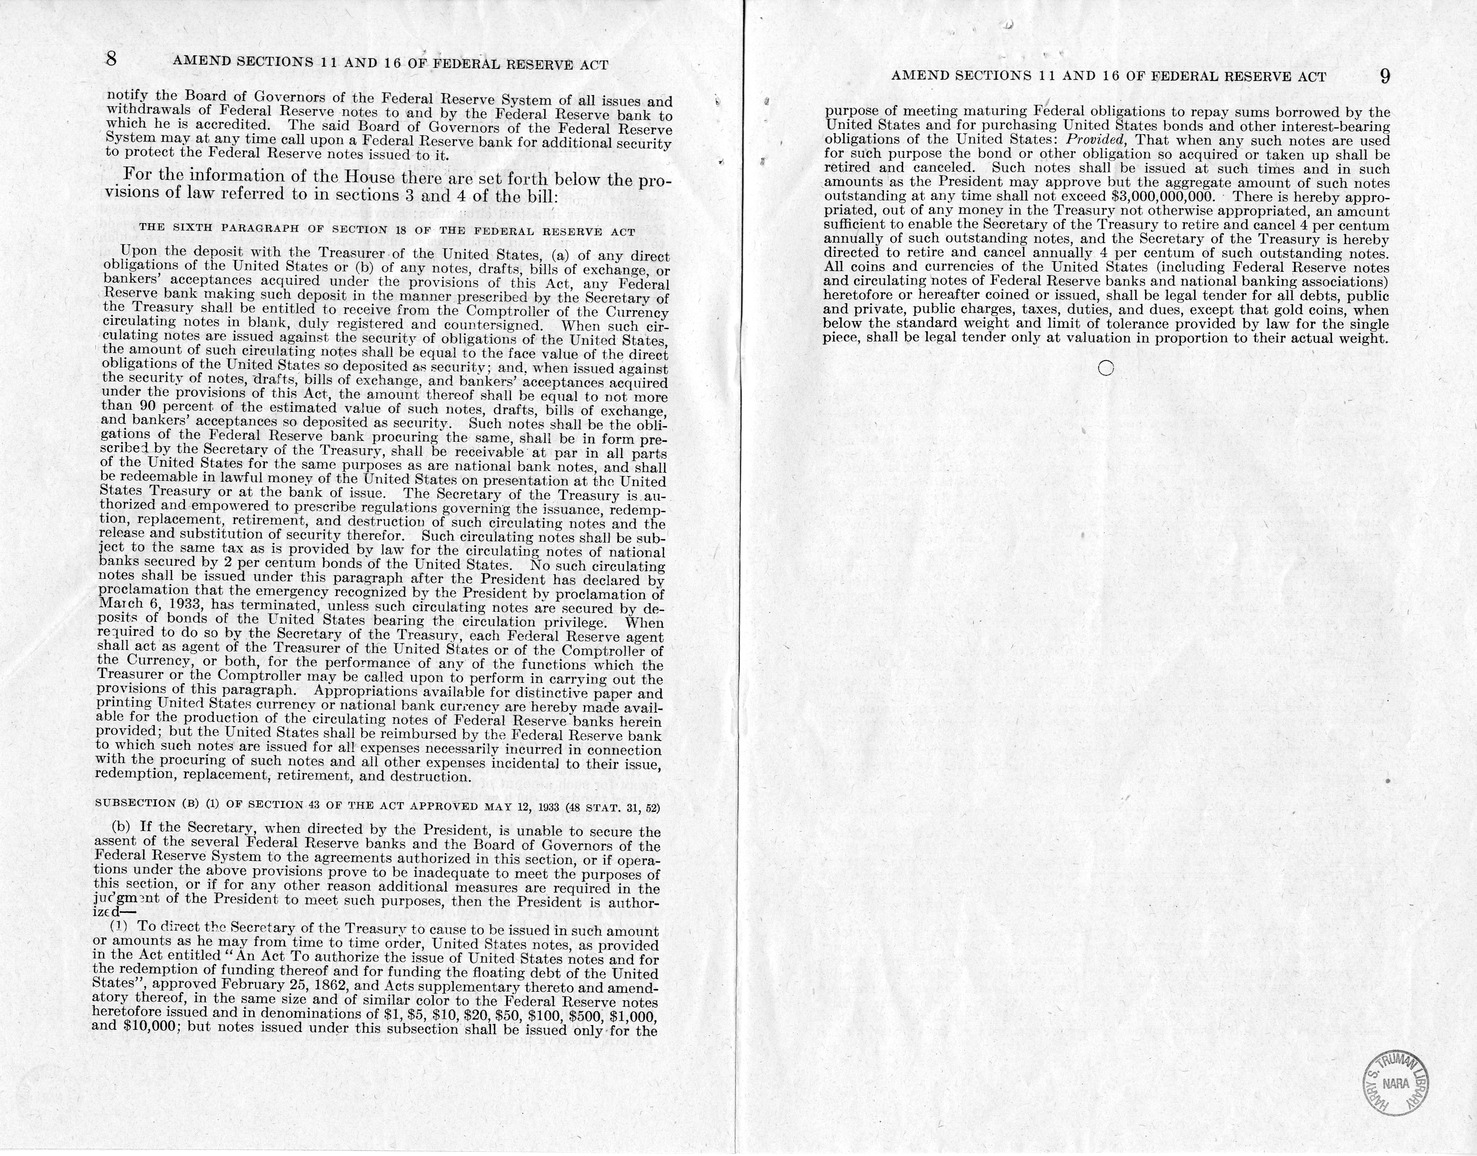 Memorandum from Harold D. Smith to M. C. Latta, S. 510, To Amend Sections 11(c) and 16 of the Federal Reserve Act, as Amended, and for Other Purposes, with Attachments